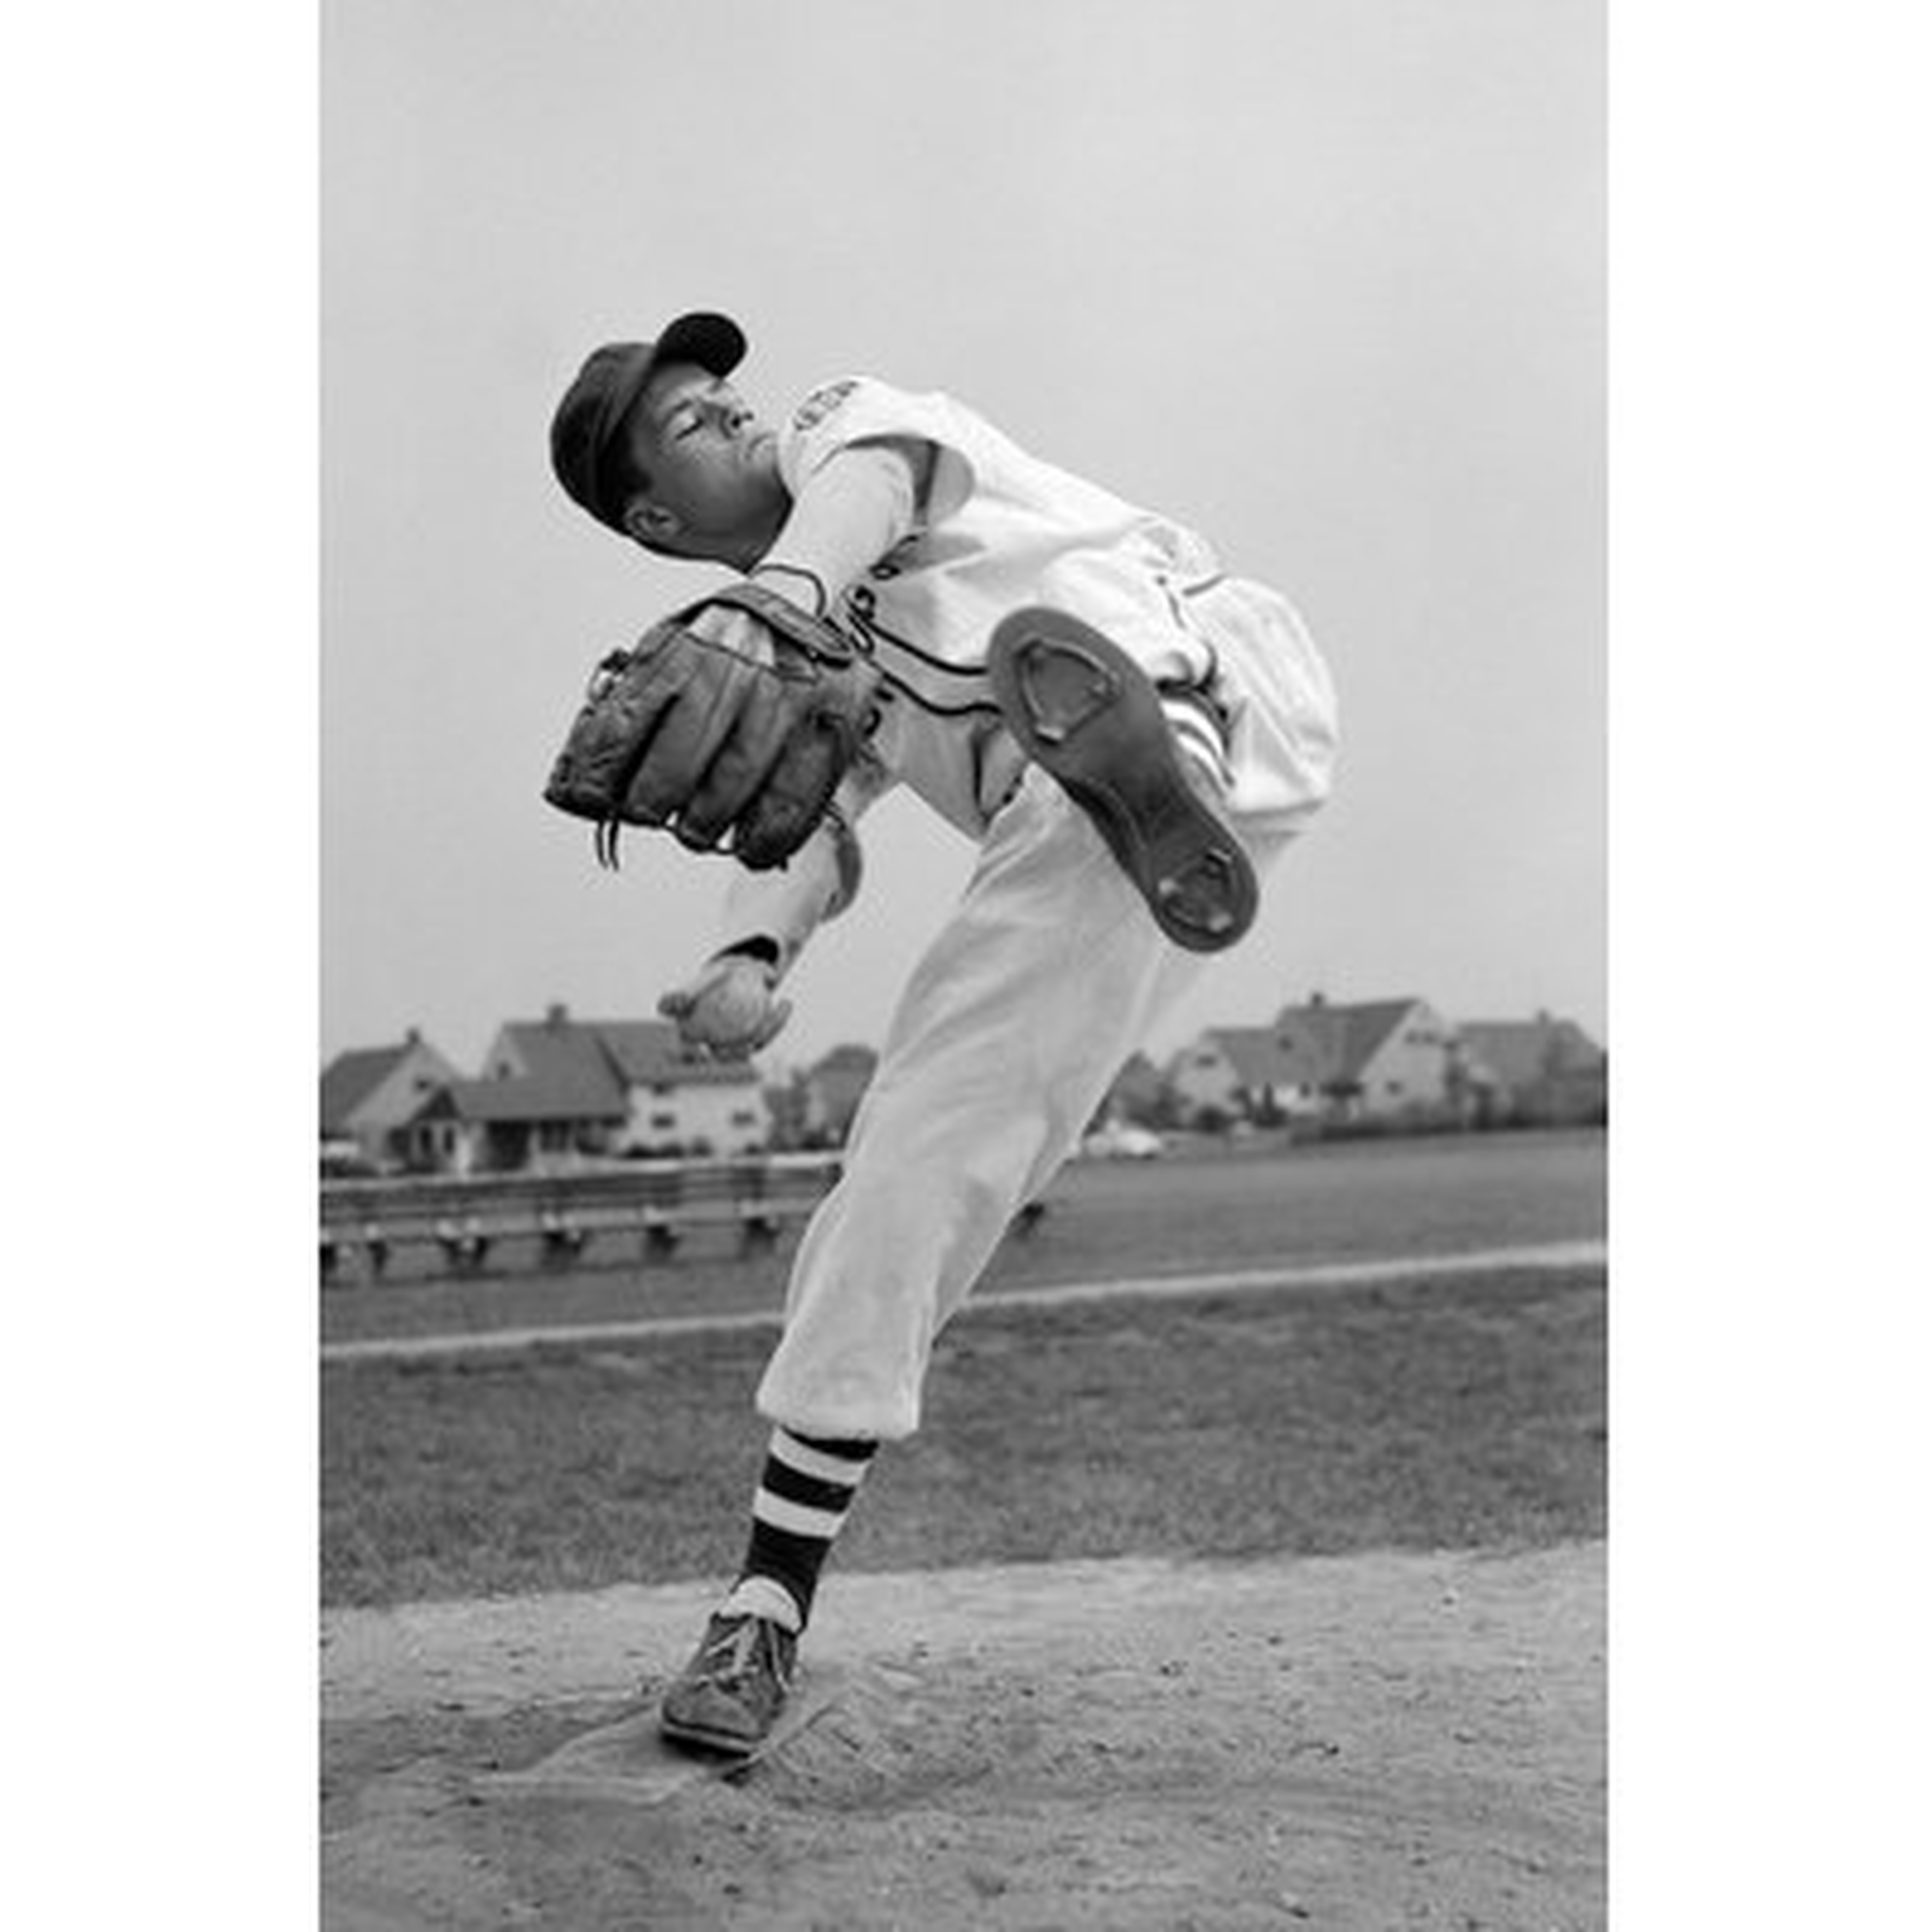 '1950s Teen in Baseball Uniform Winding Up for Pitch' Photographic Print on Wrapped Canvas - Wayfair